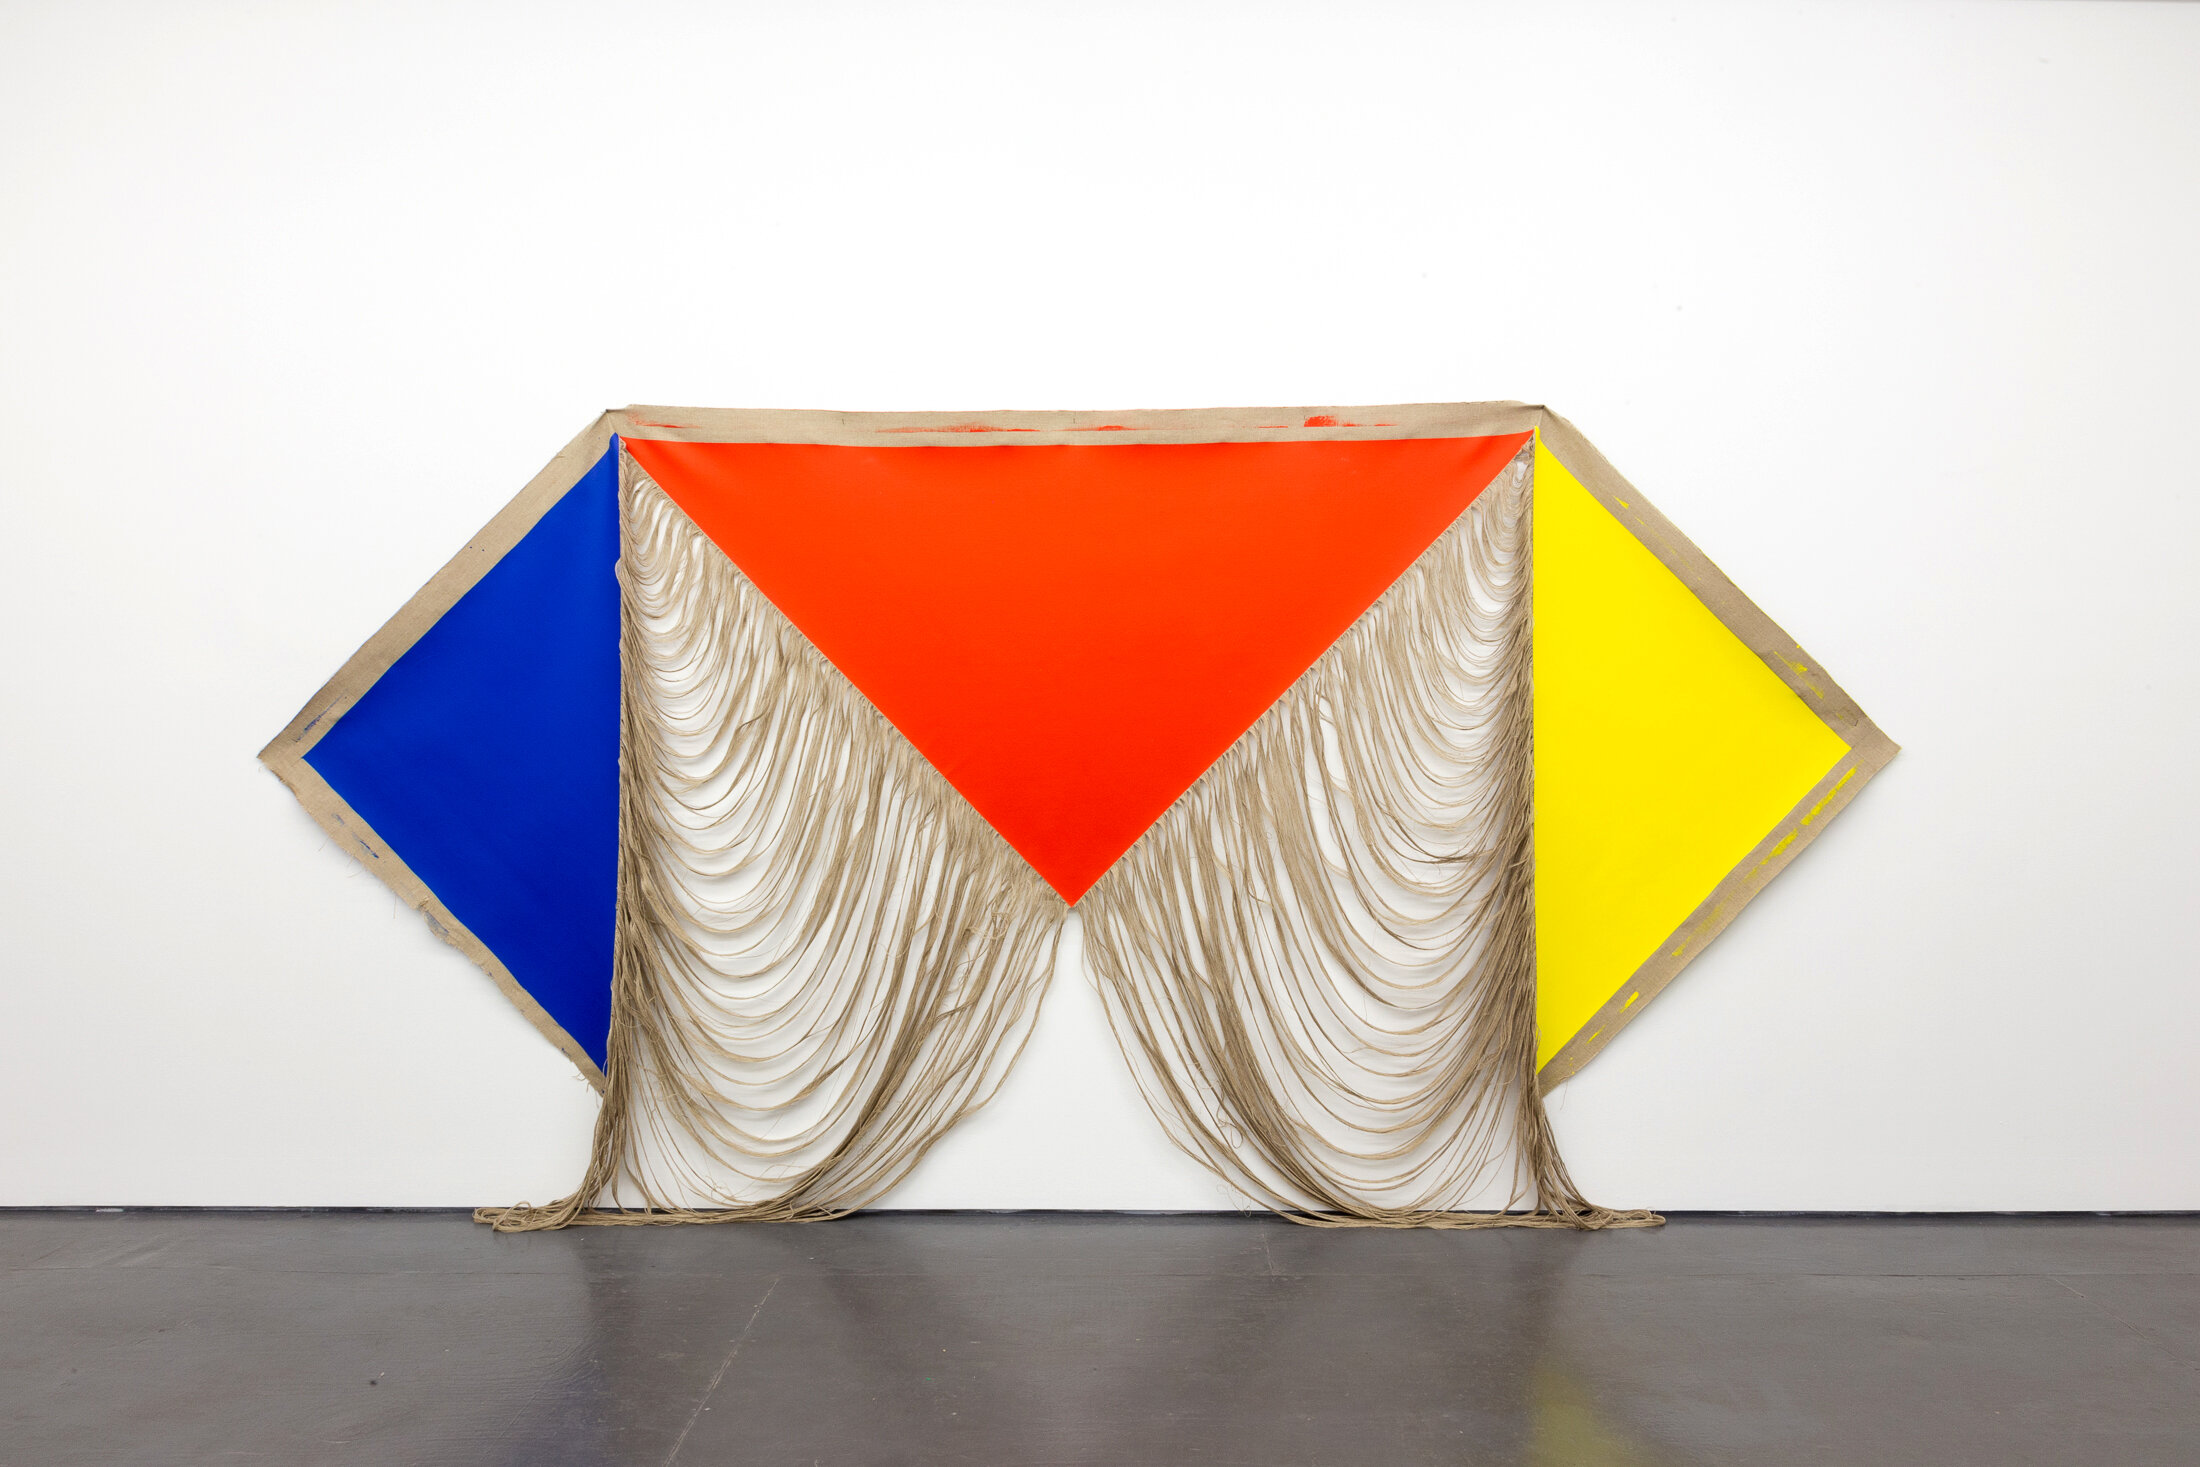  Lily de Bont  Red, yellow, blue  2019, acrylic on linen, 71 x 138 inches 